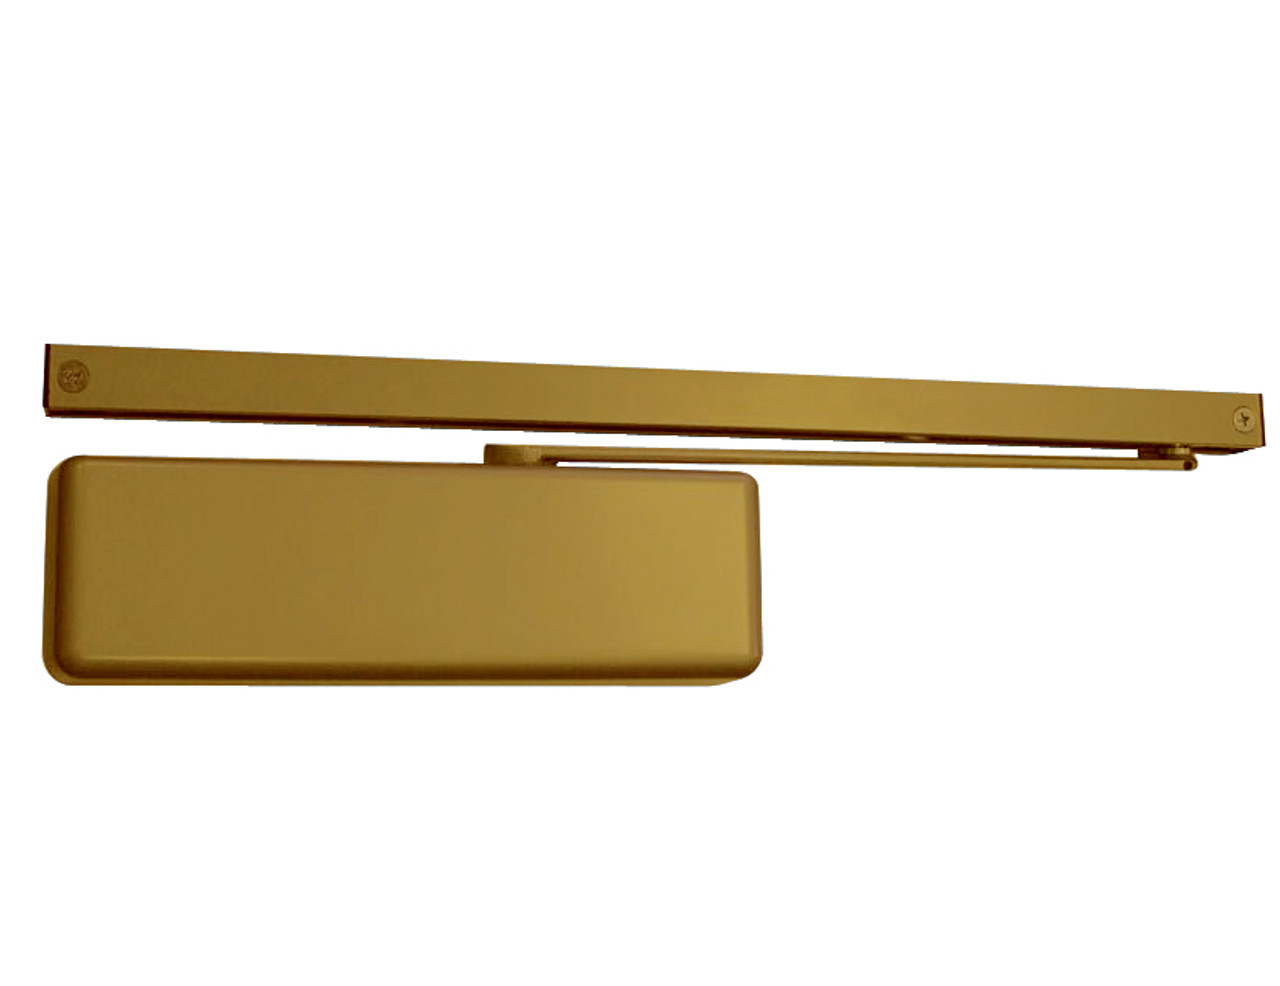 4040XPT-DE-BUMPER-RH-STAT LCN Door Closer with Double Egress Standard Track with Bumper Arm in Statuary Finish